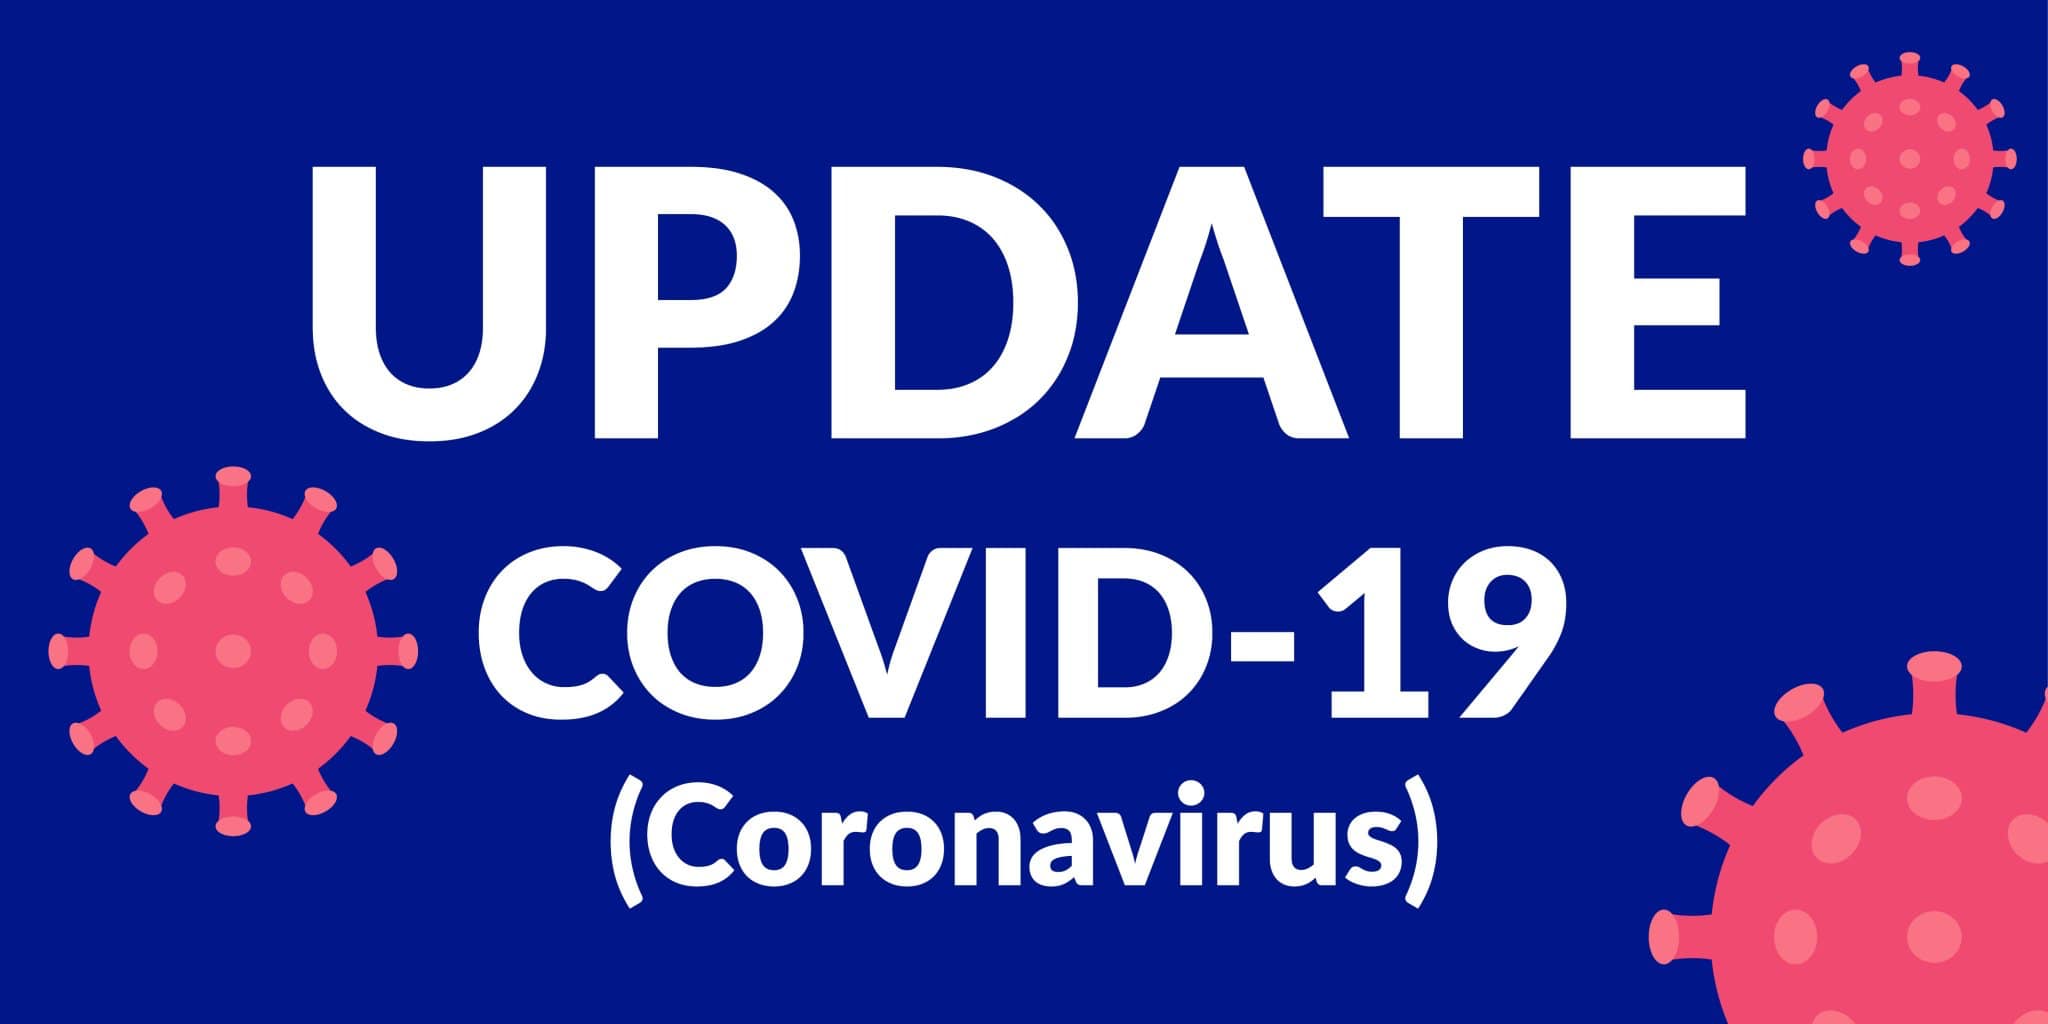 One new COVID-19 case detected during the Cup Match holiday